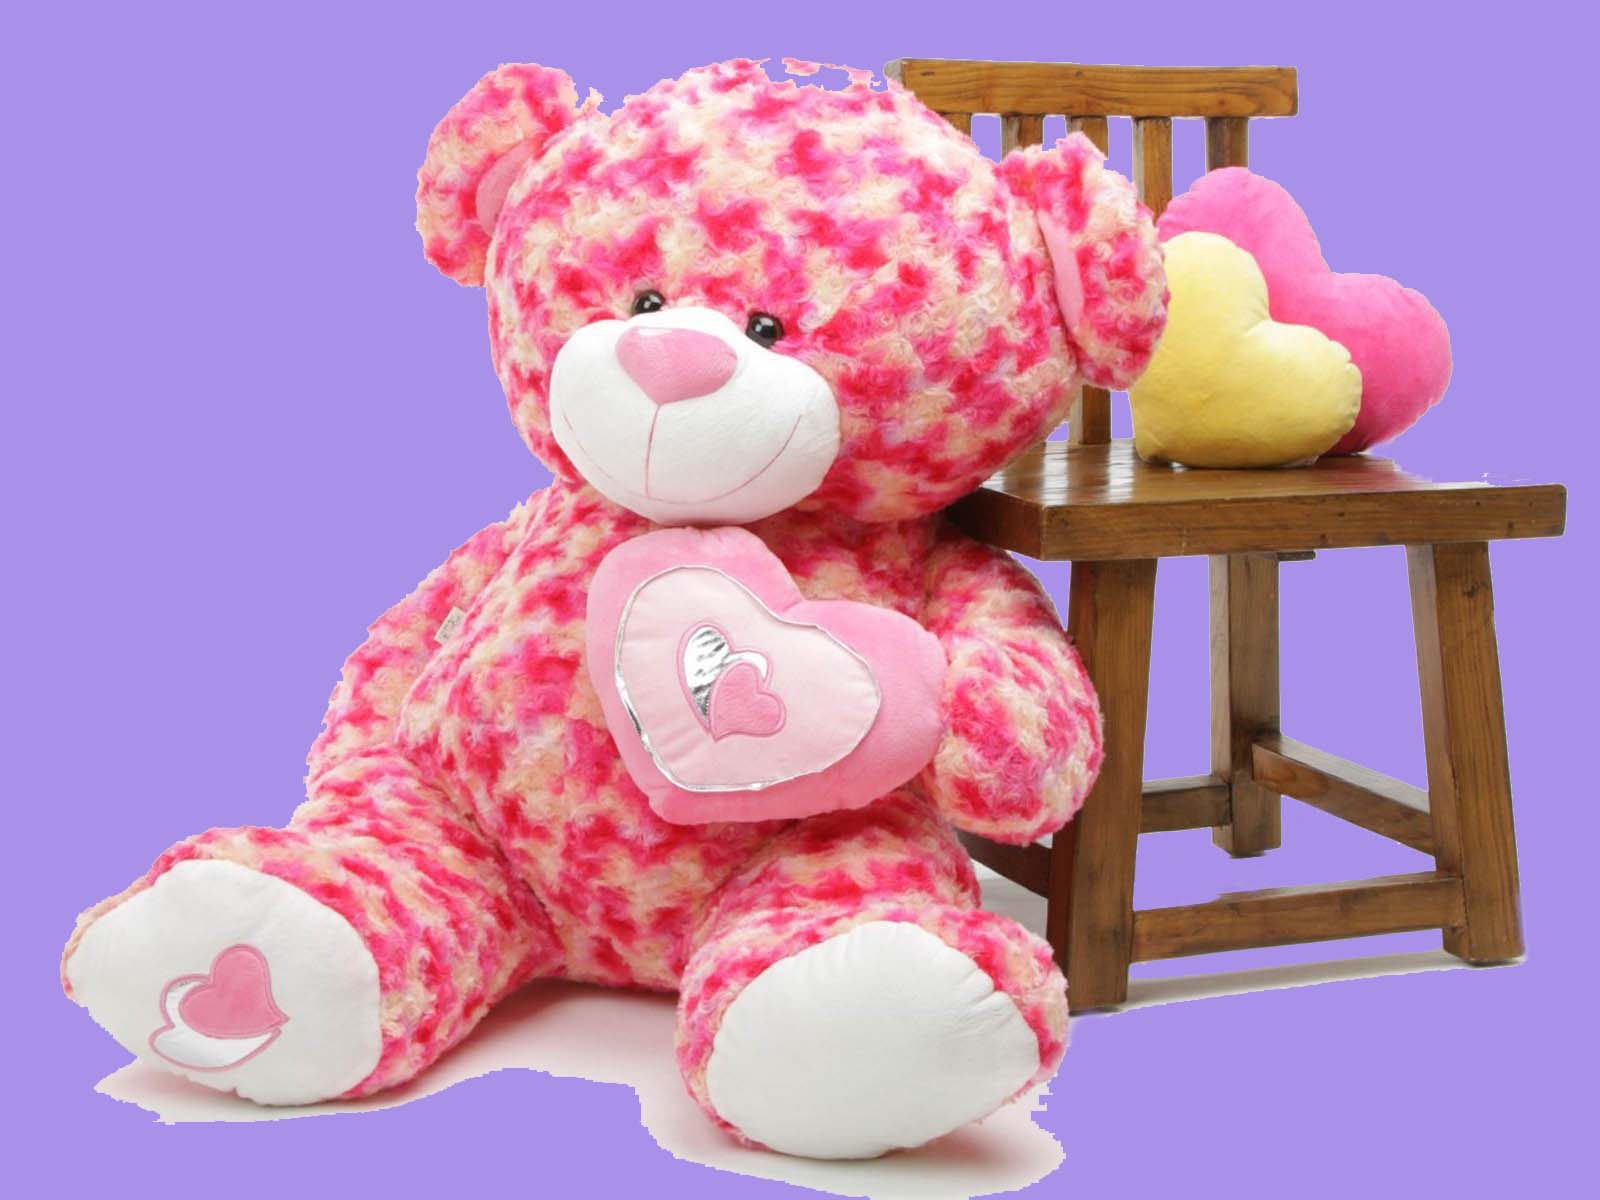 Cute Teddy Bear Live Wallpaper for Android Free Download Apps 1920